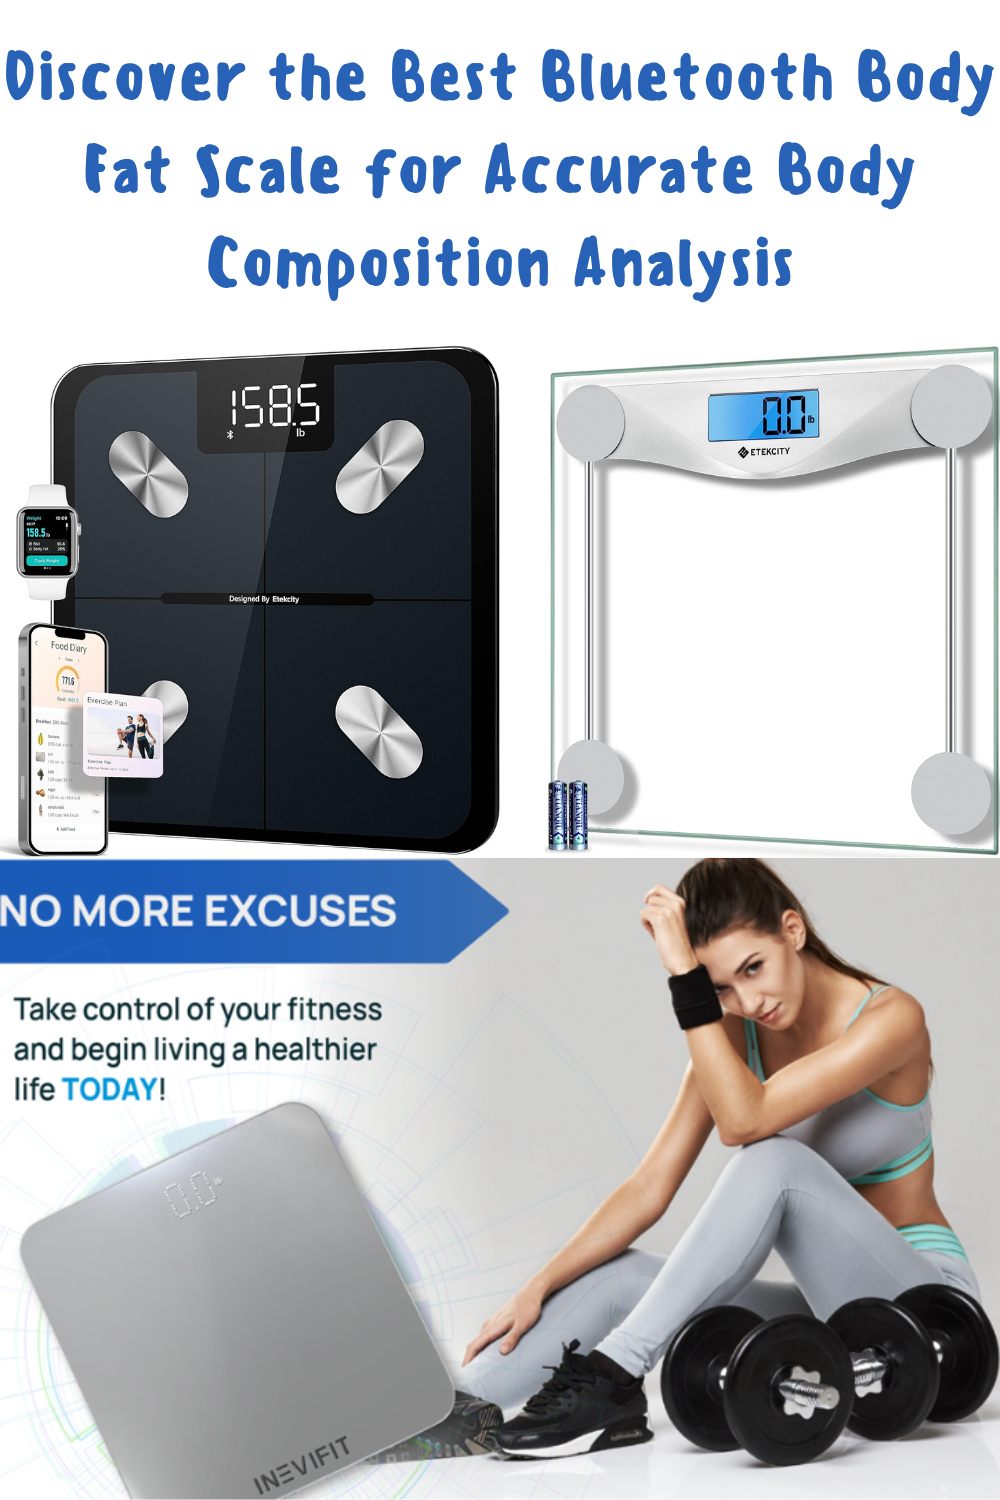 Discover the Best Bluetooth Body Fat Scale for Accurate Body Composition  Analysis - mdmahadiul islamsarker - Medium